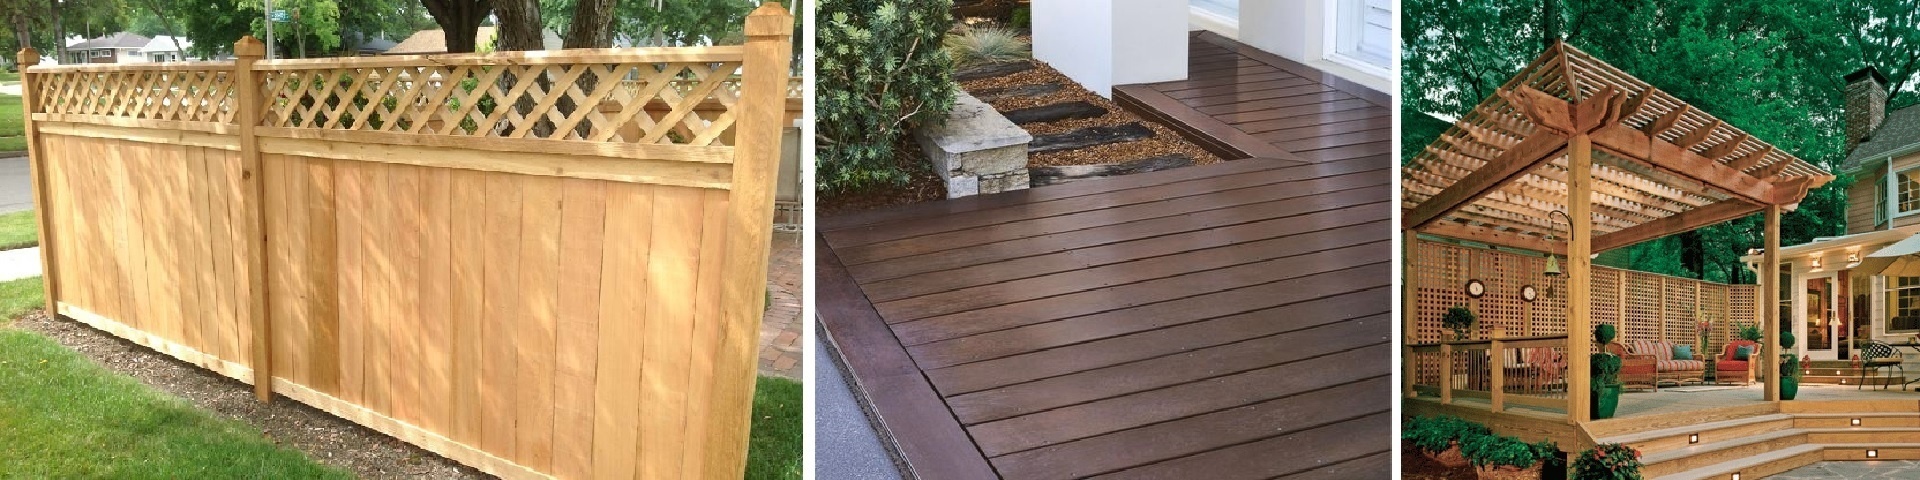 Houston Fence Replacement and Deck Repair Services